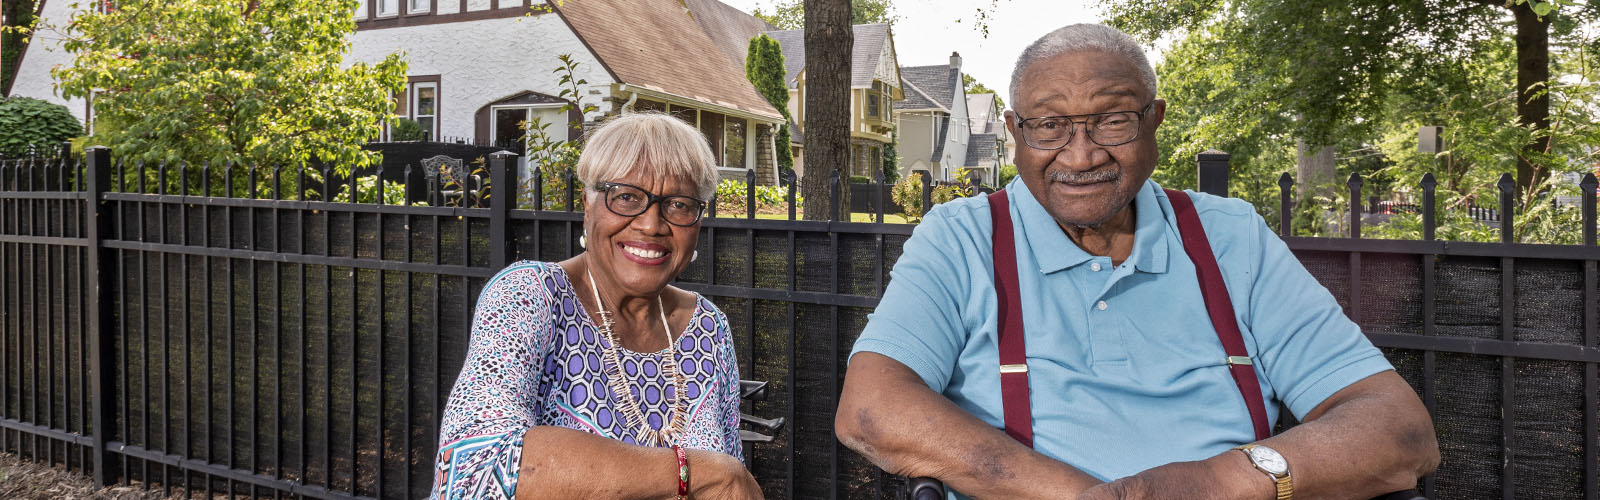 Kathleen and Henry Christmon moved to Paddock Hills in 1965, making it the first successfully integrated neighborhood in the city.